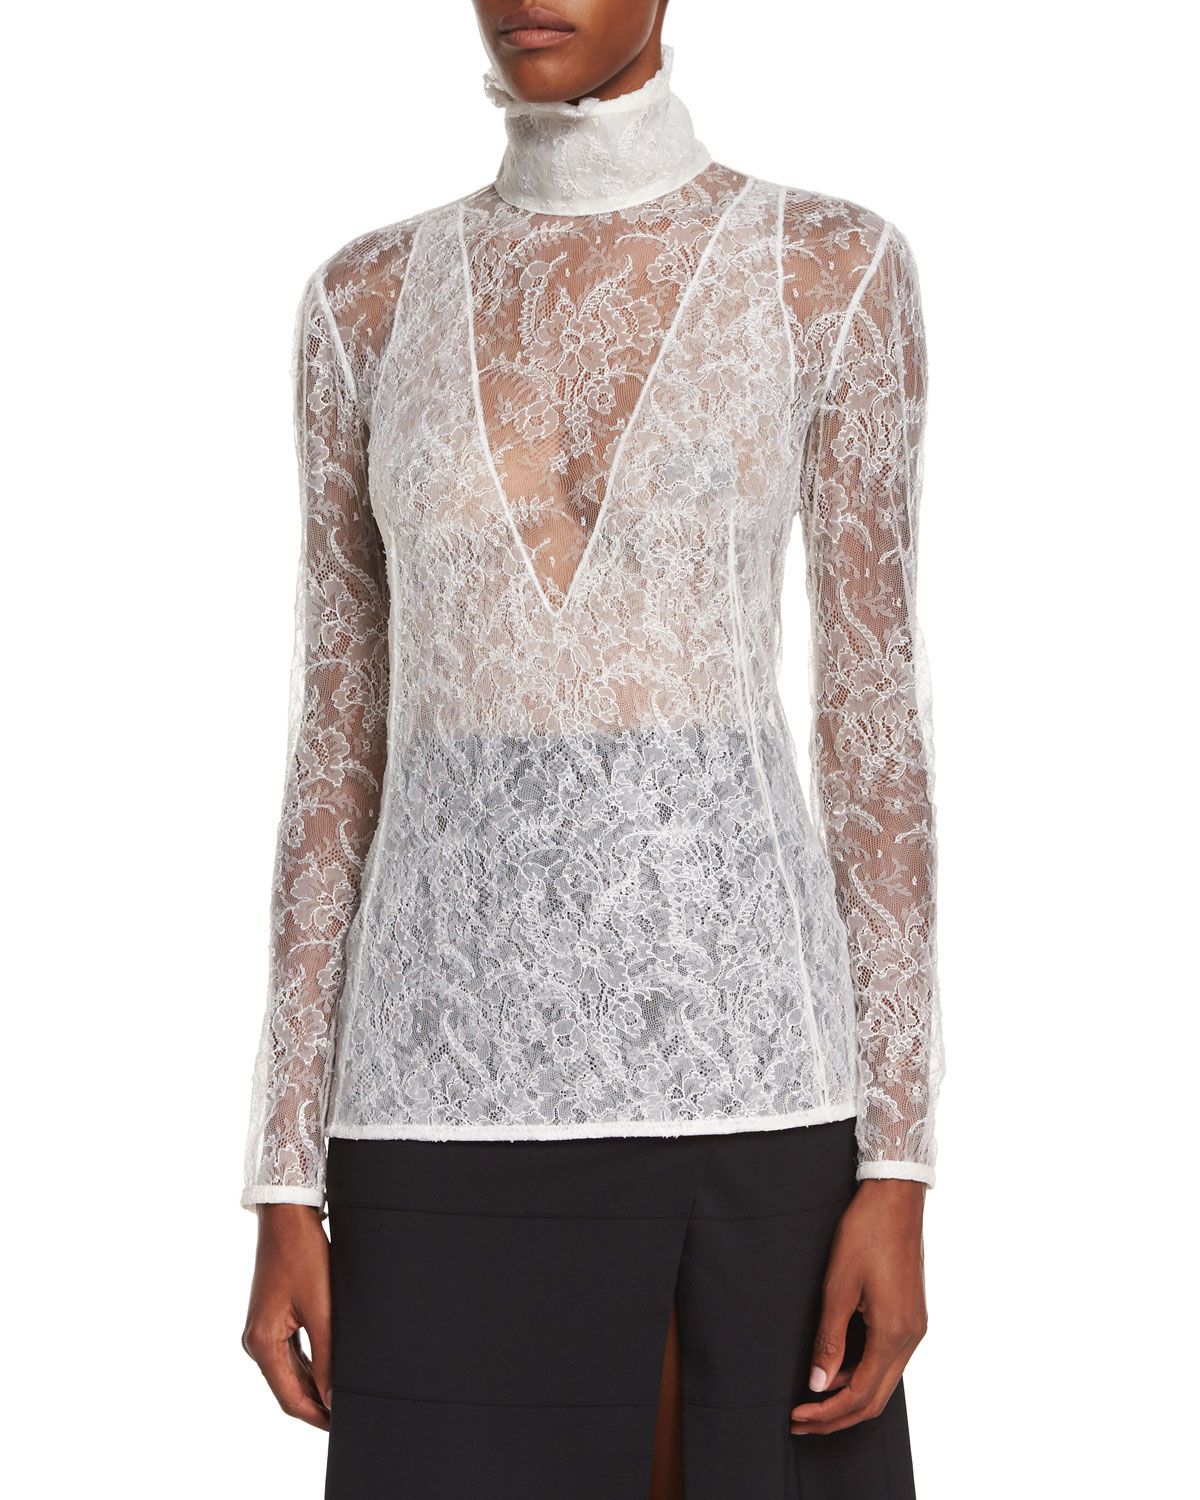 Lyst - Altuzarra High-neck Sheer Lace Blouse in Natural